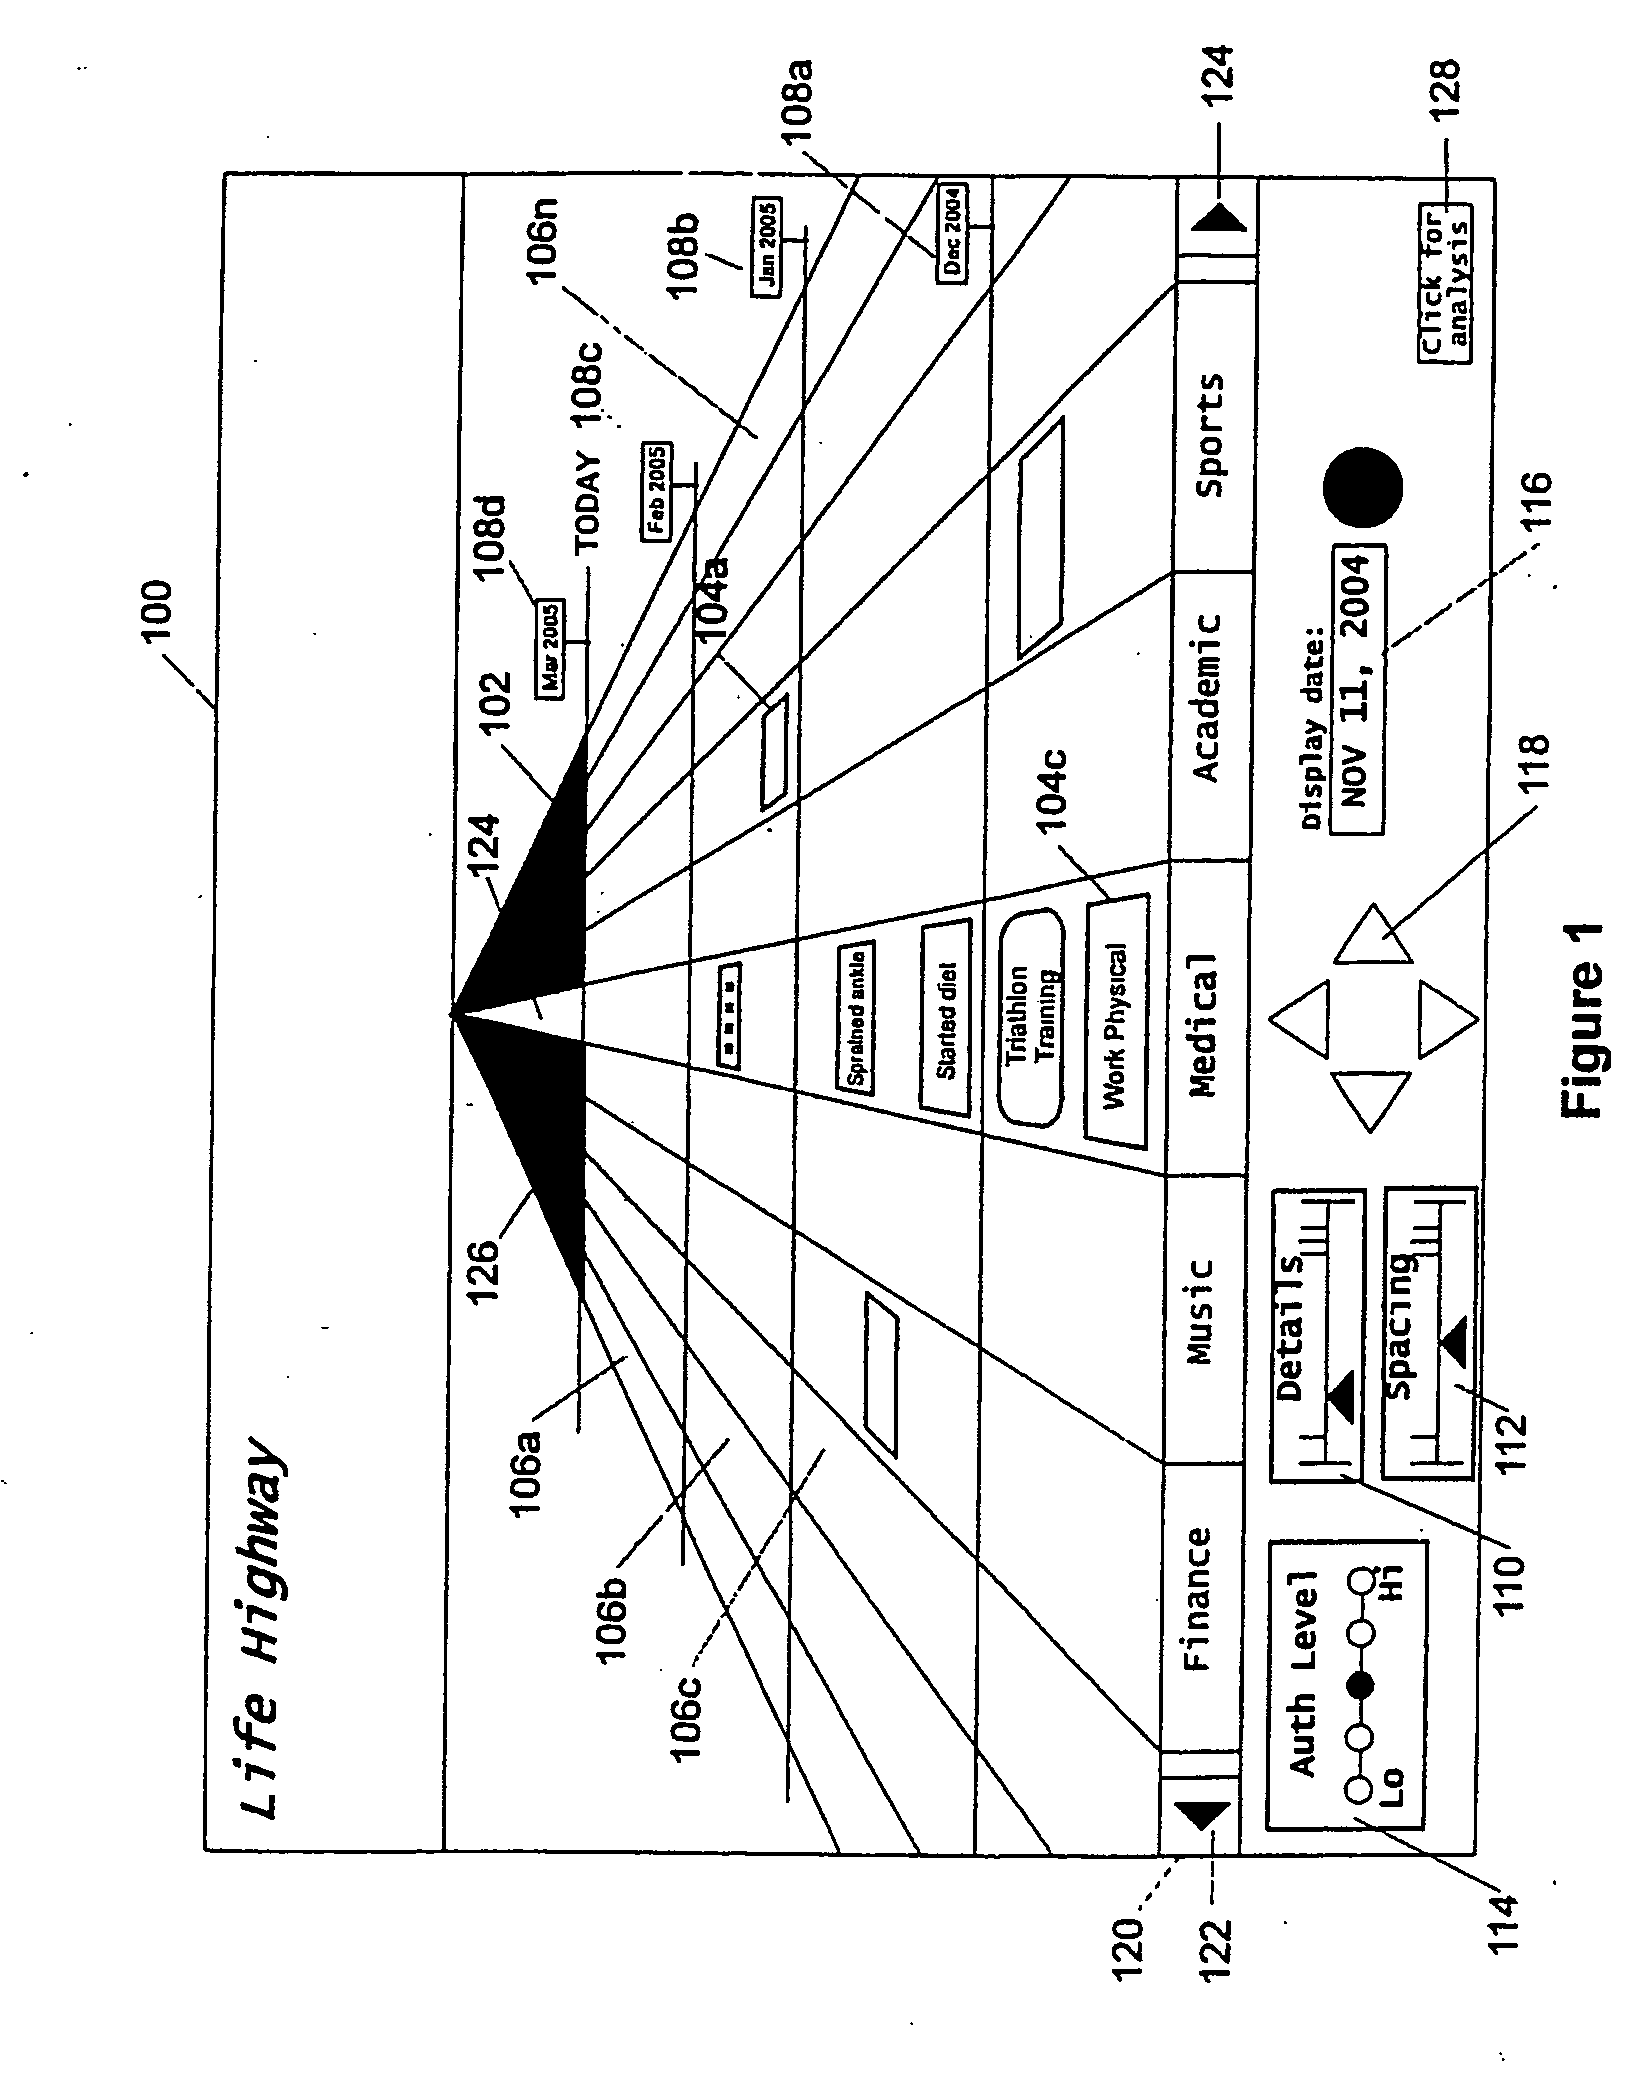 Methods, systems, and computer program products for managing audio and/or video information via a web broadcast